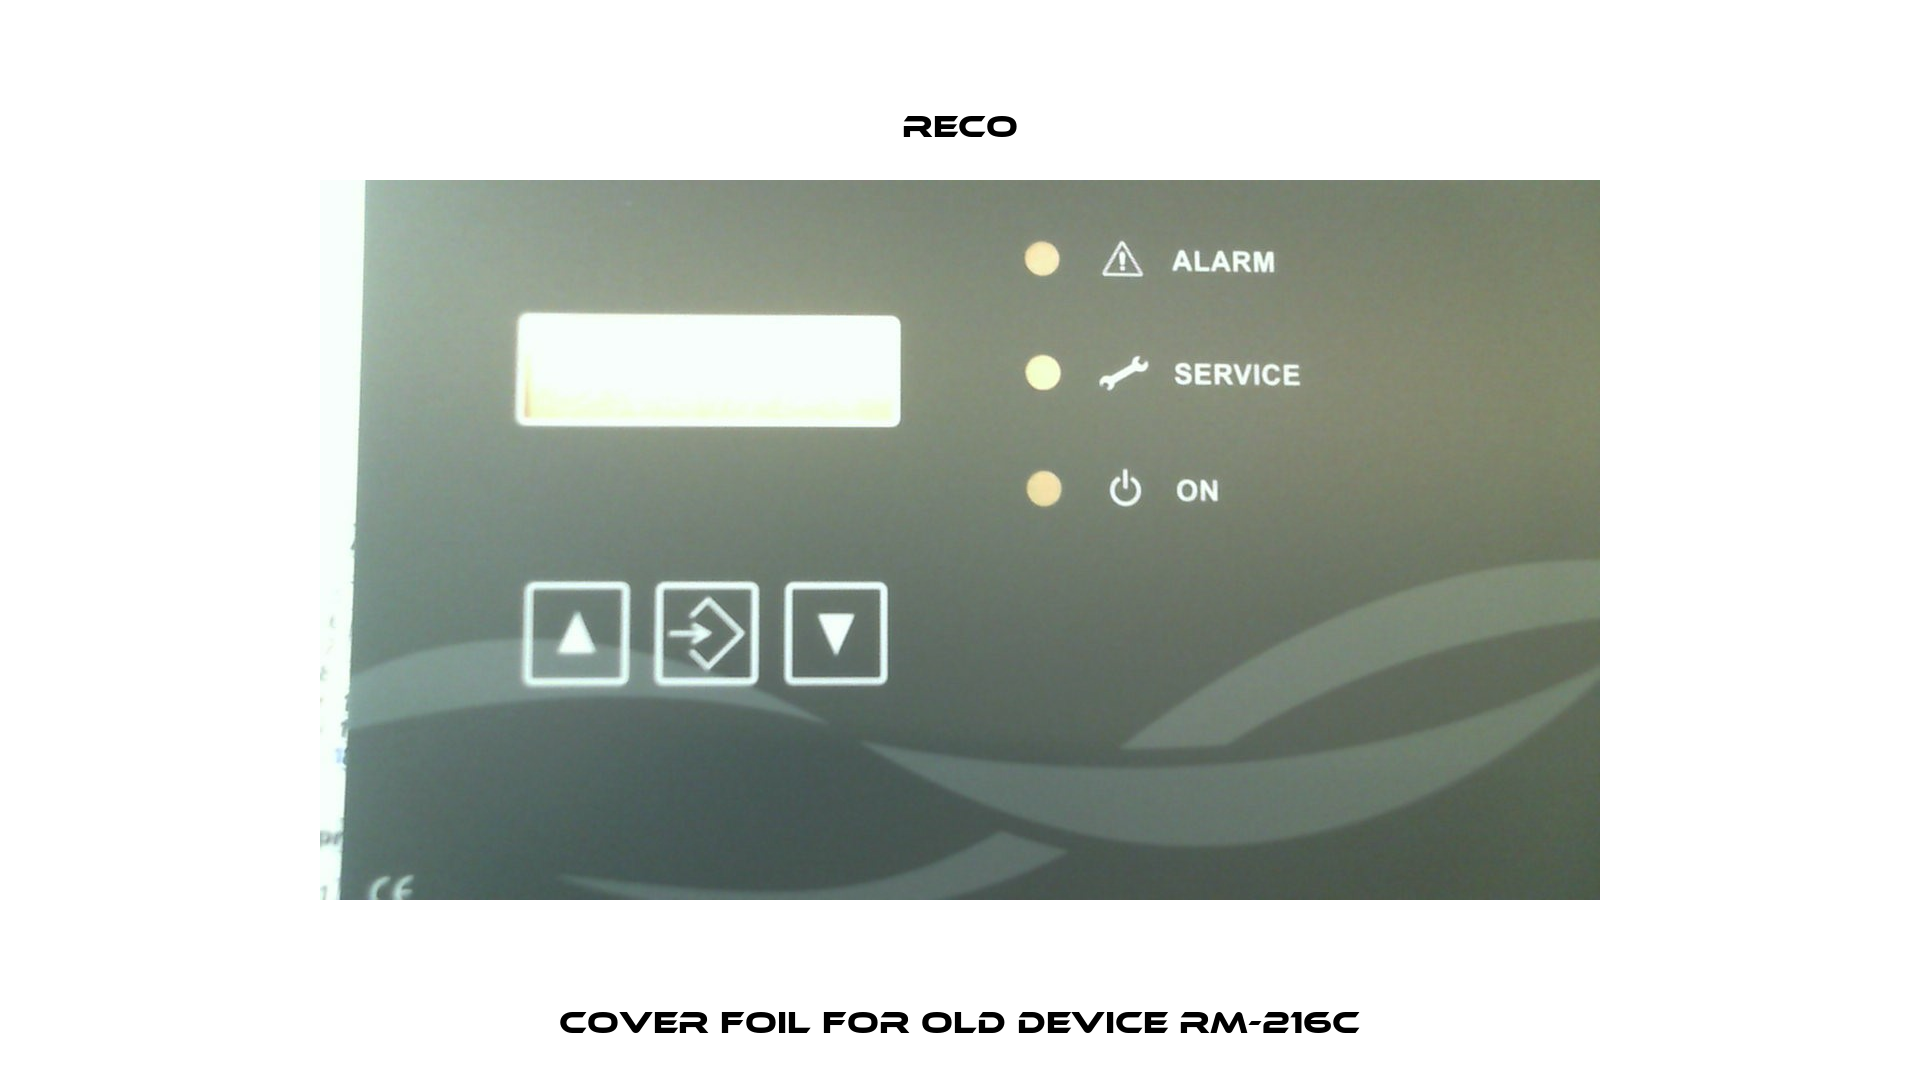 Cover foil for old device RM-216C Reco